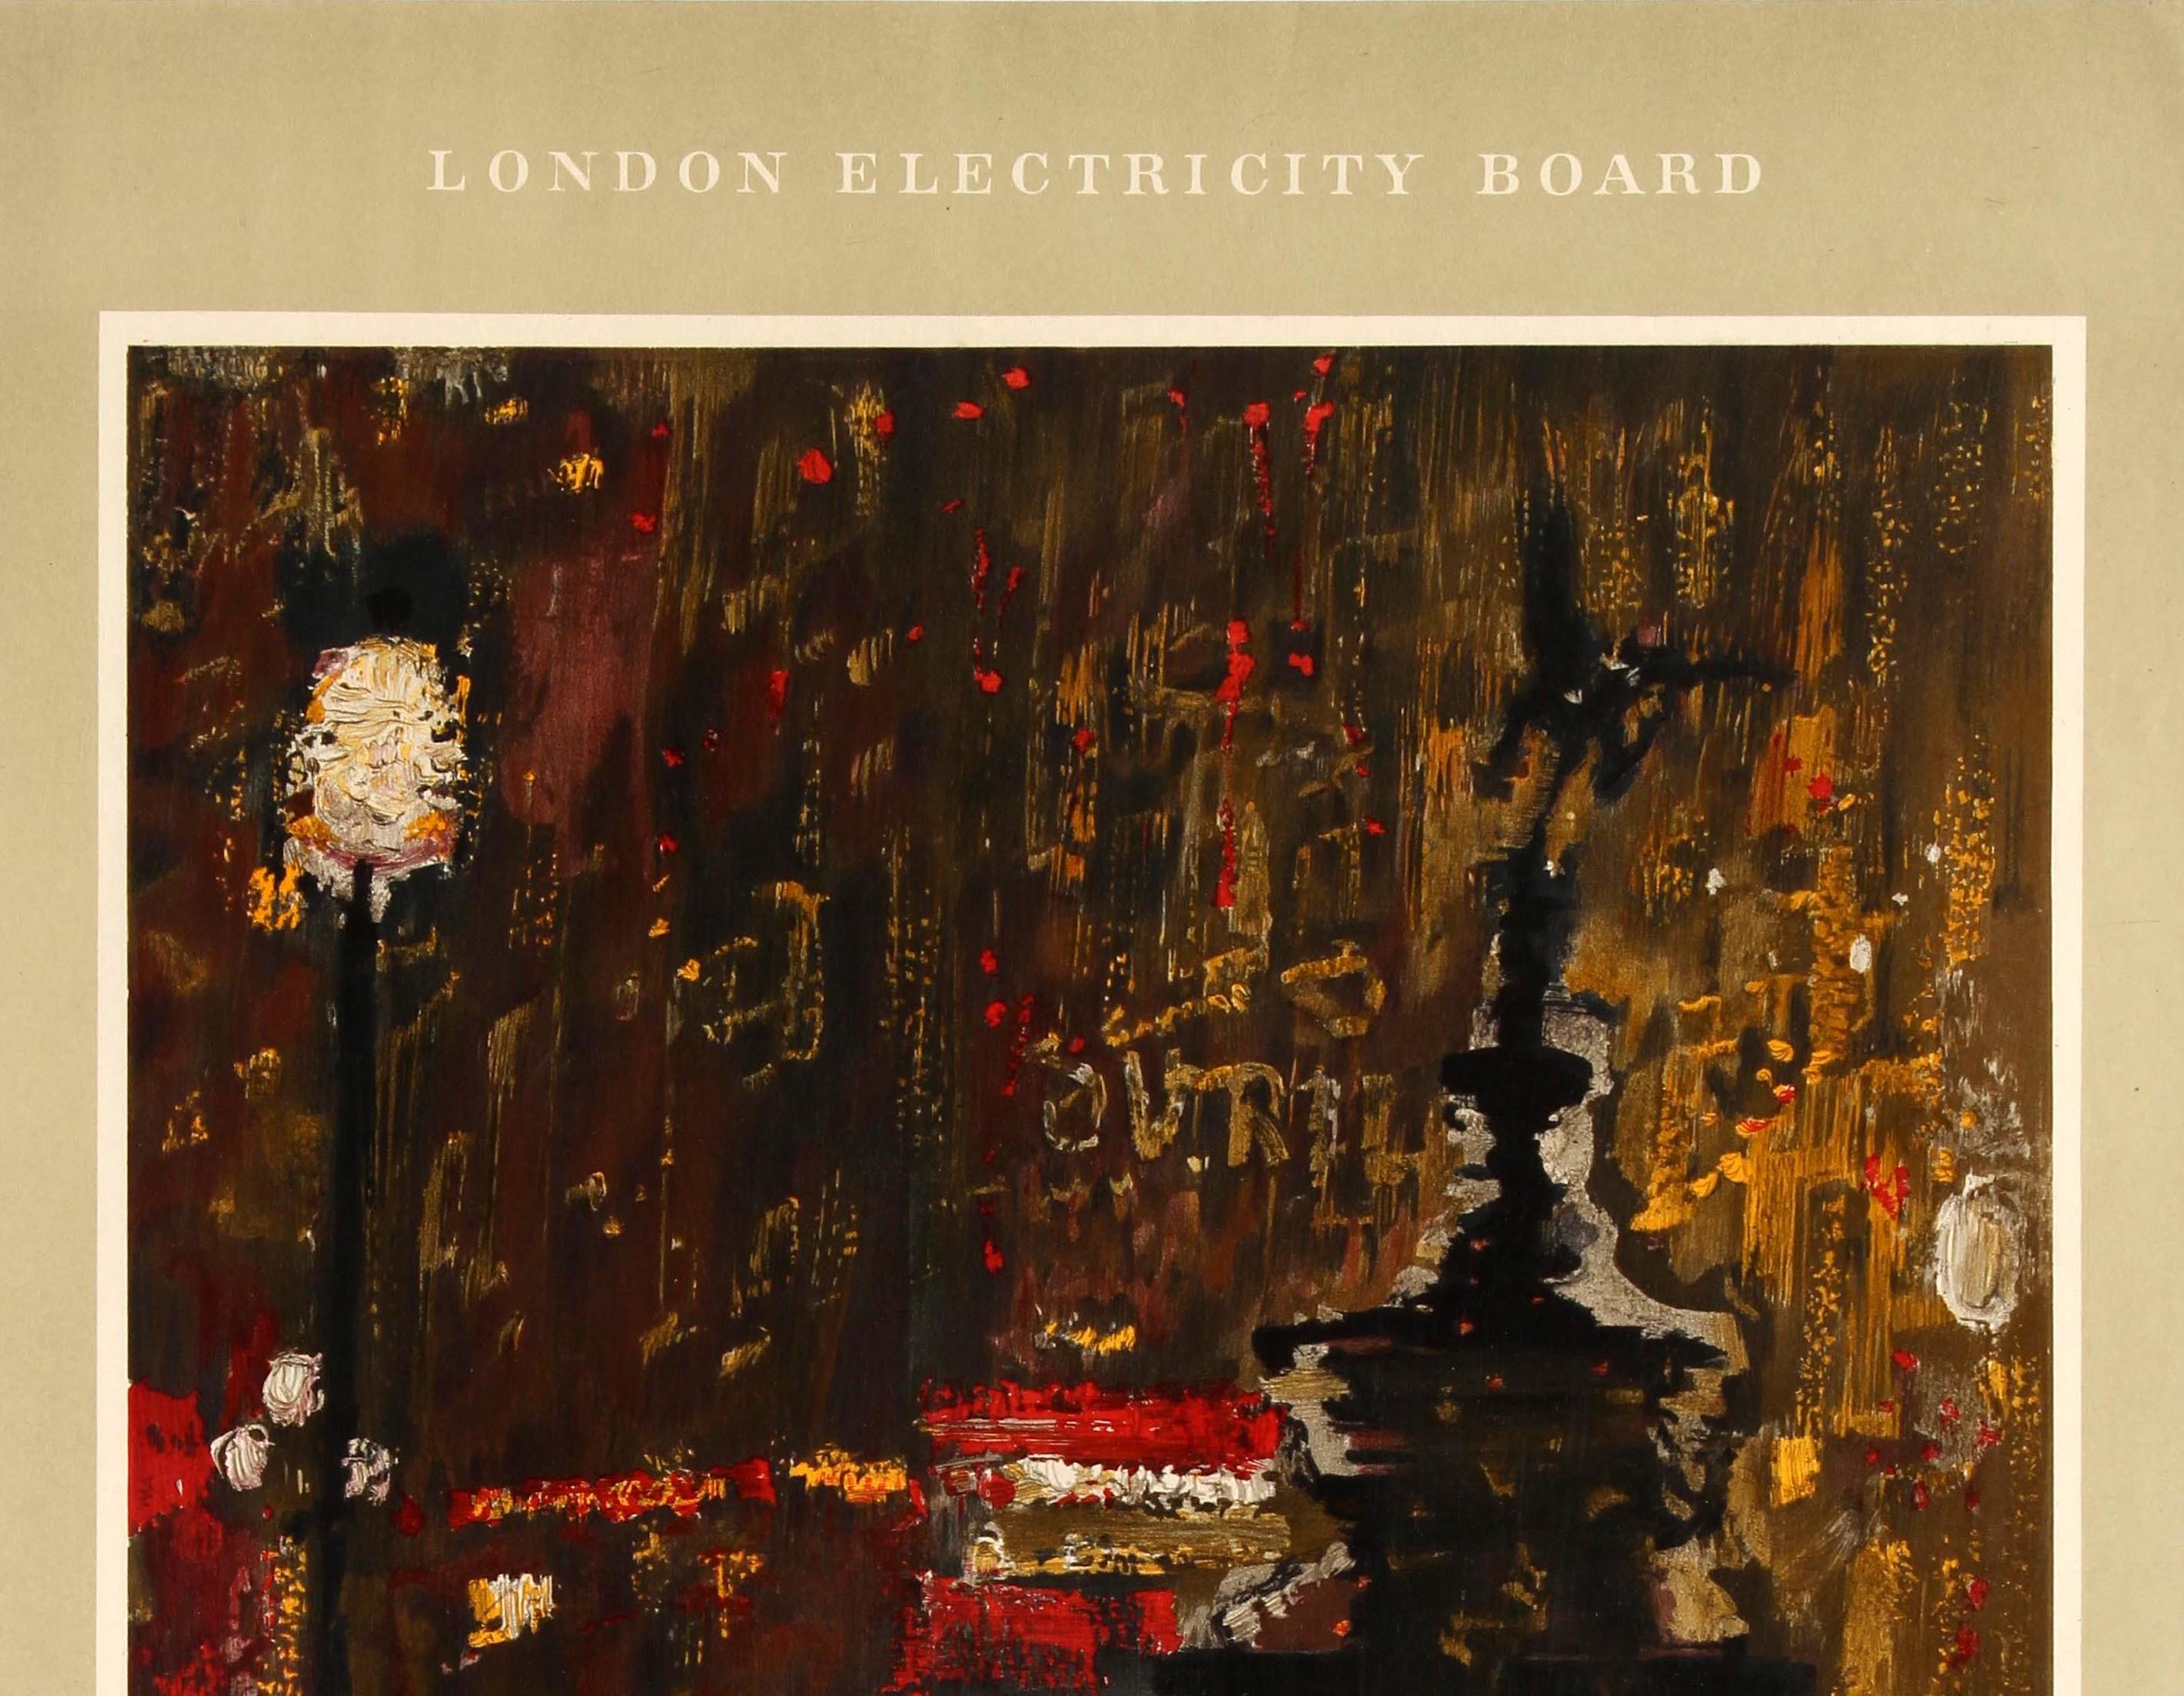 Original Vintage London Electricity Board Poster Power Of London Piccadilly Eros - Print by Ruskin Spear